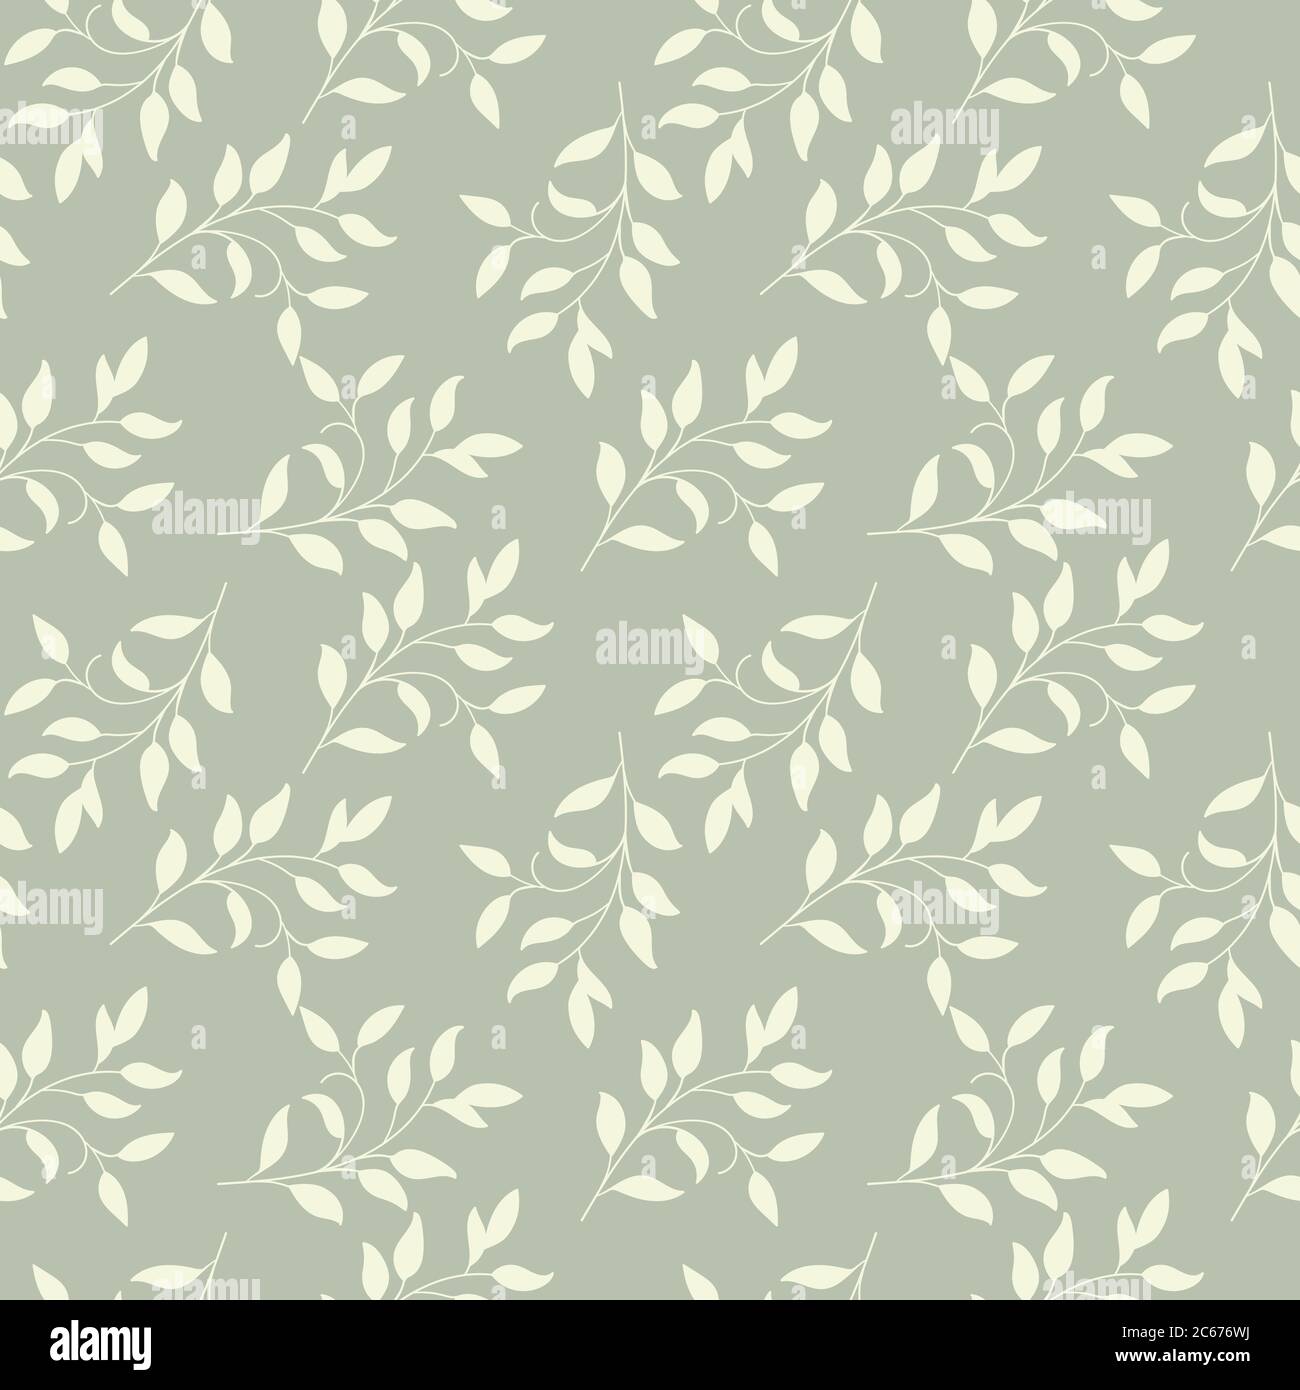 Floral vector seamless pattern design for wallpapers, textiles, fabrics, tiles, wrapping papers, surface, home decor etc. Stock Vector